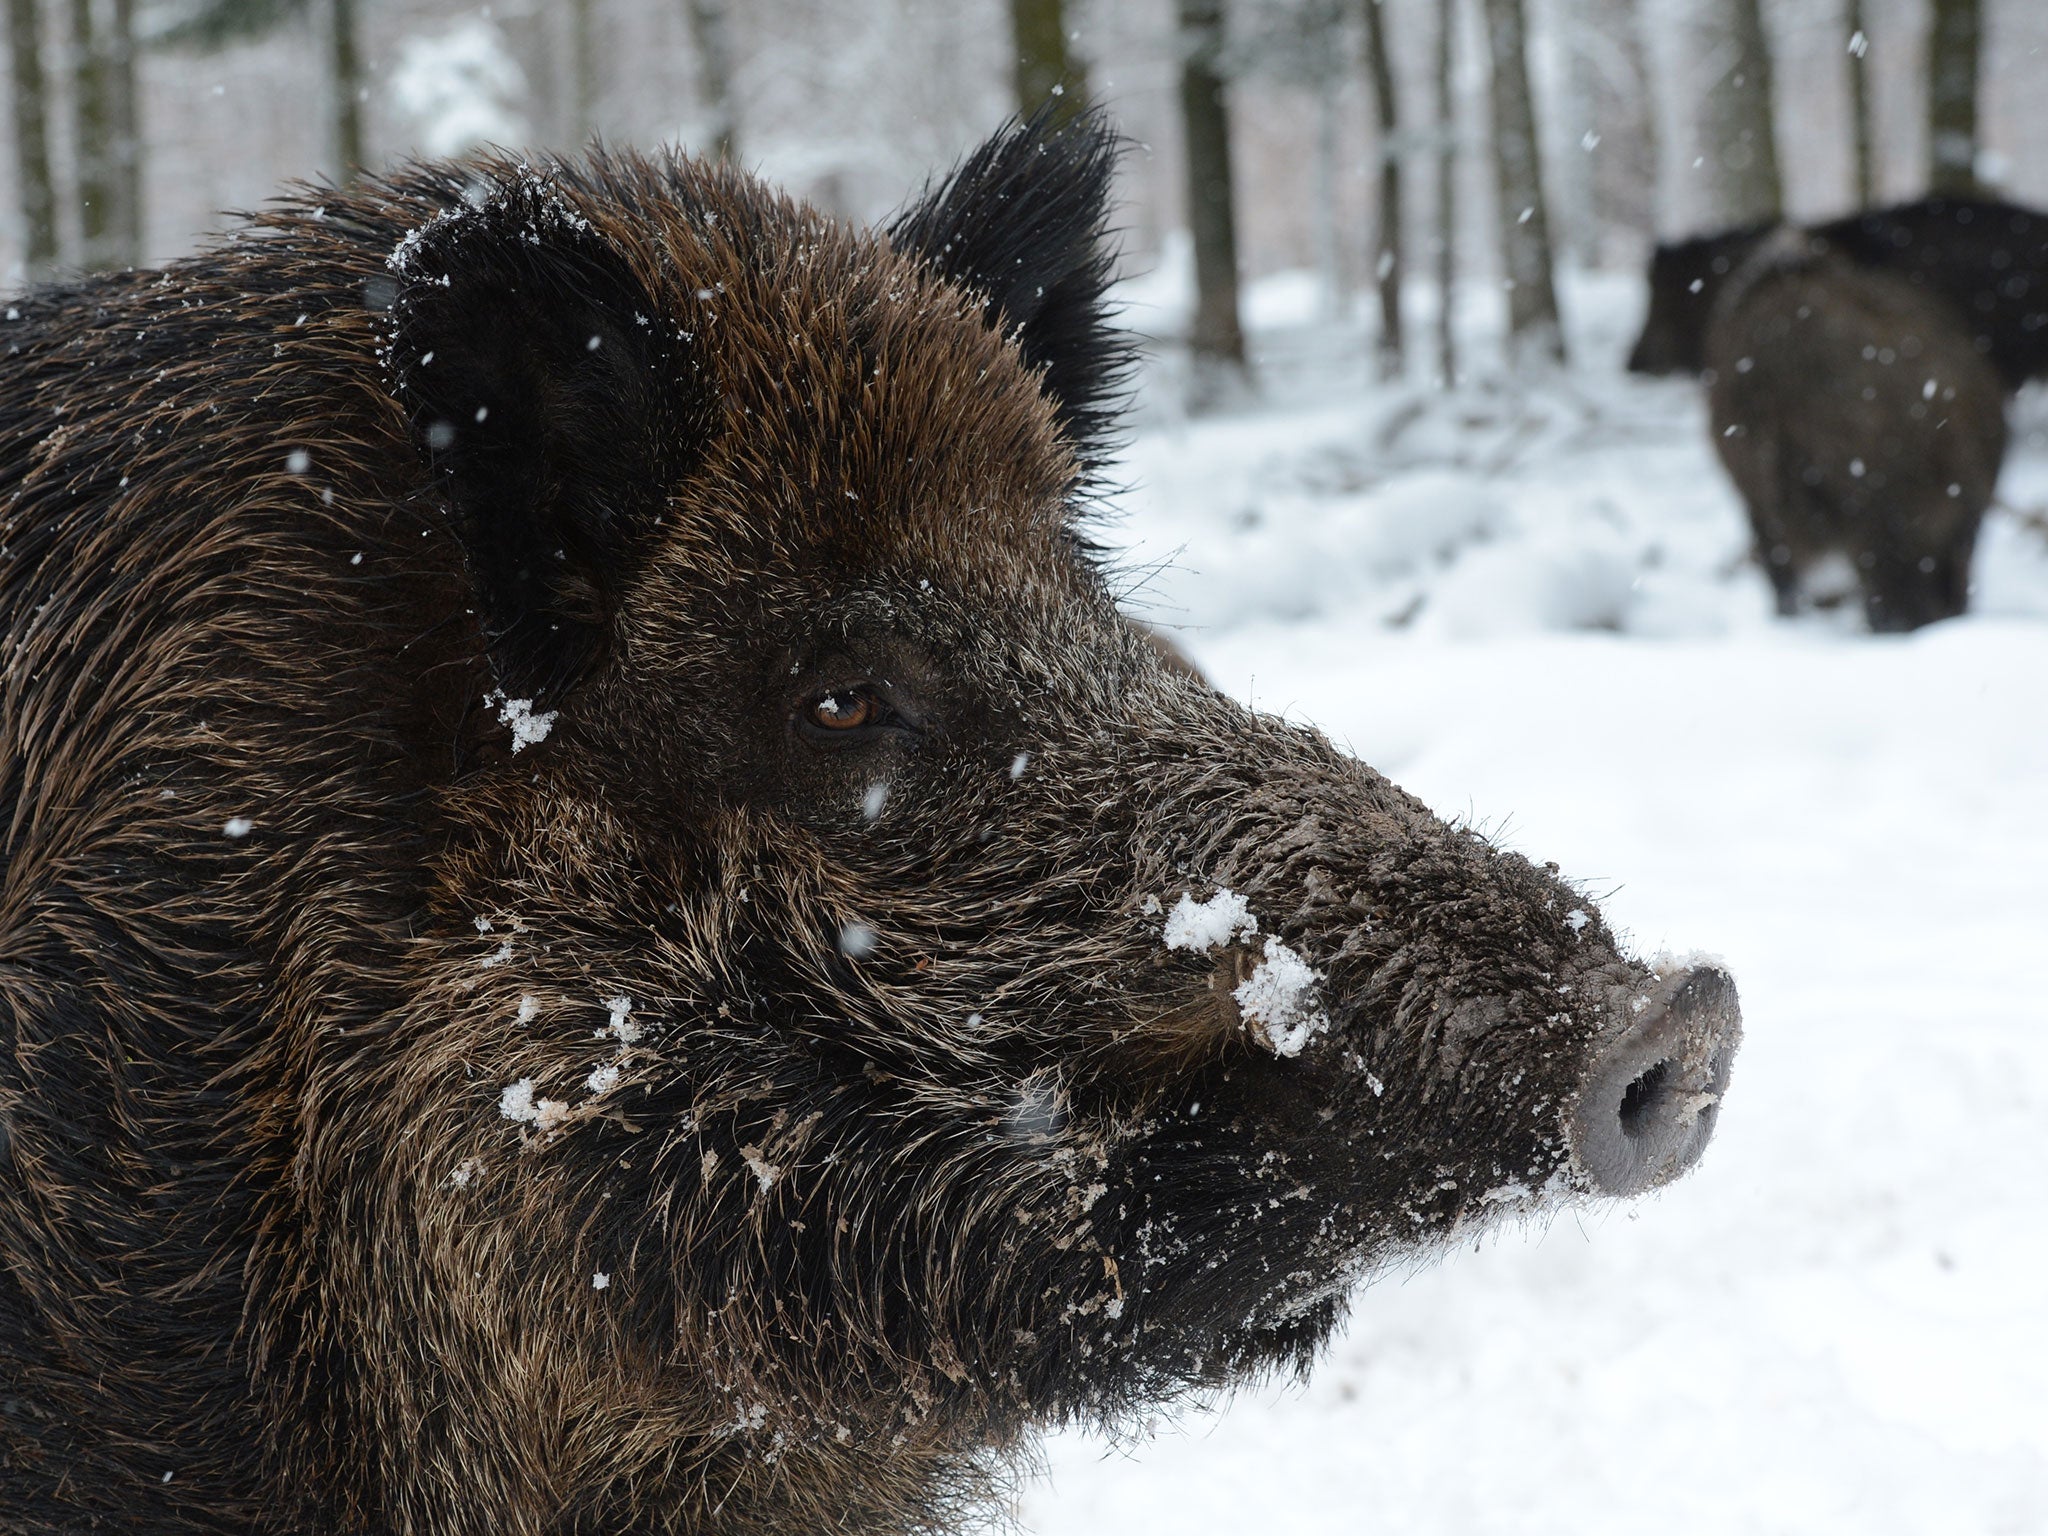 The boars are causing damage to local farms